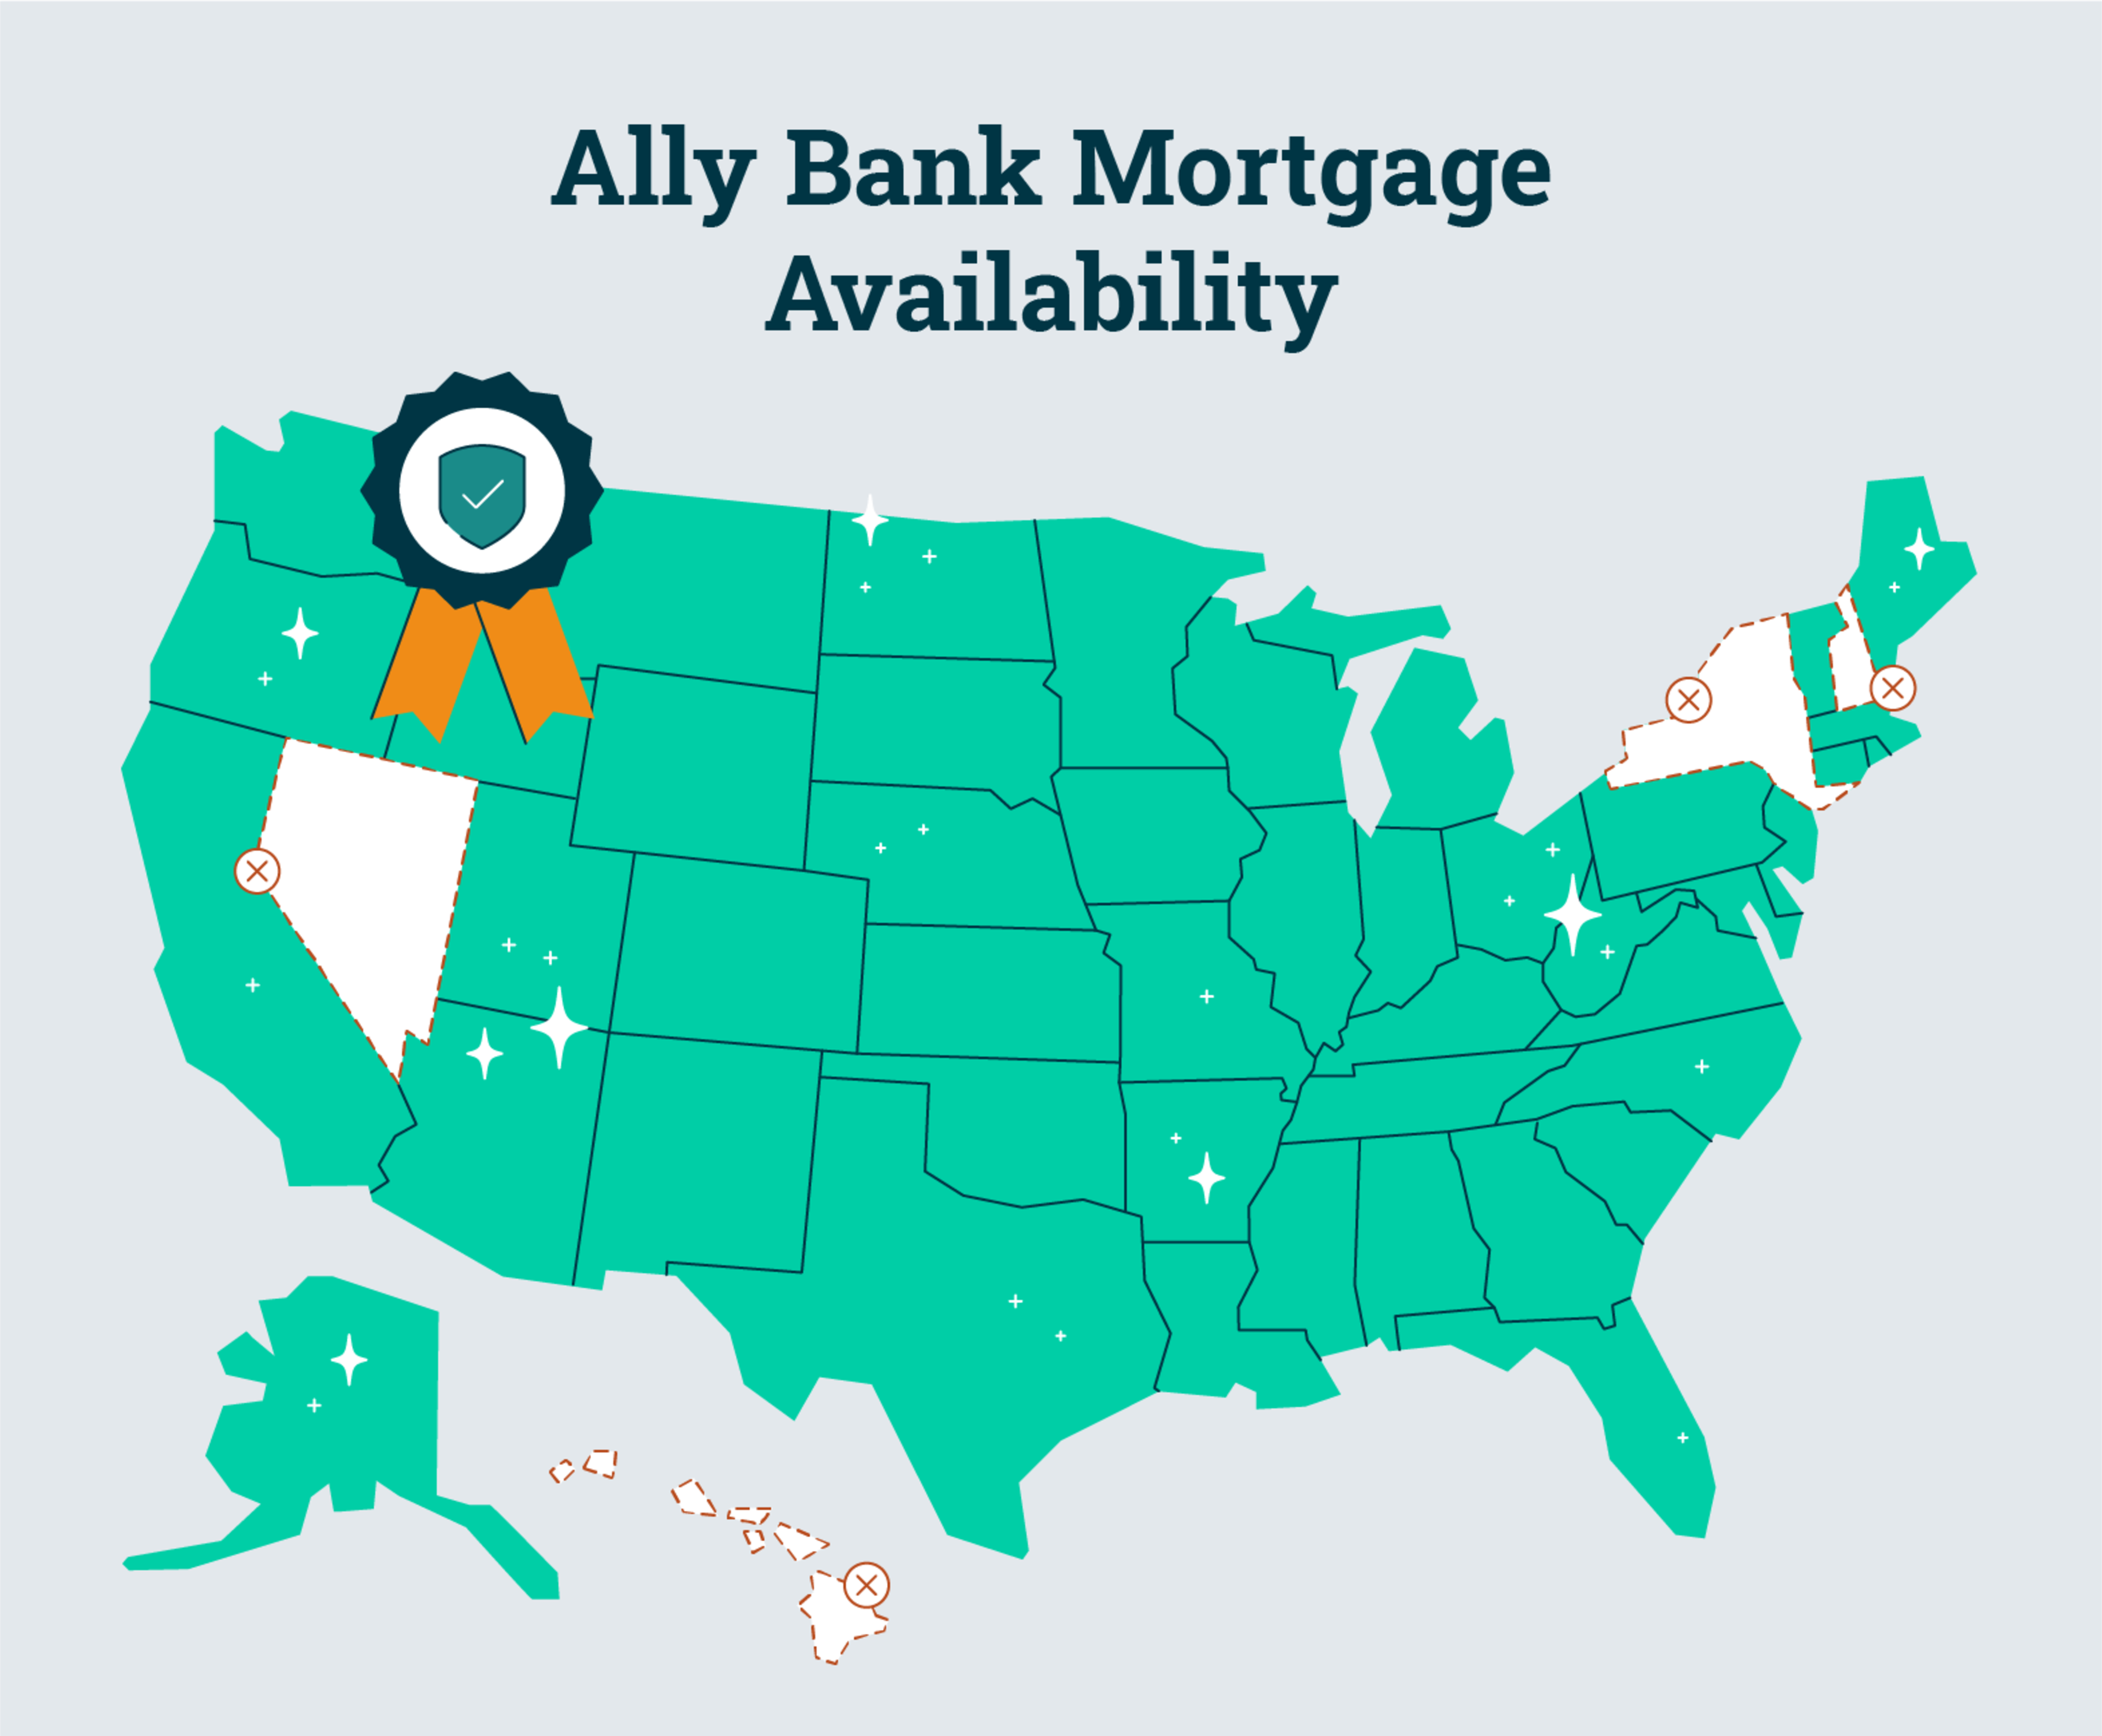 Ally Bank Mortgage availability across the U.S.